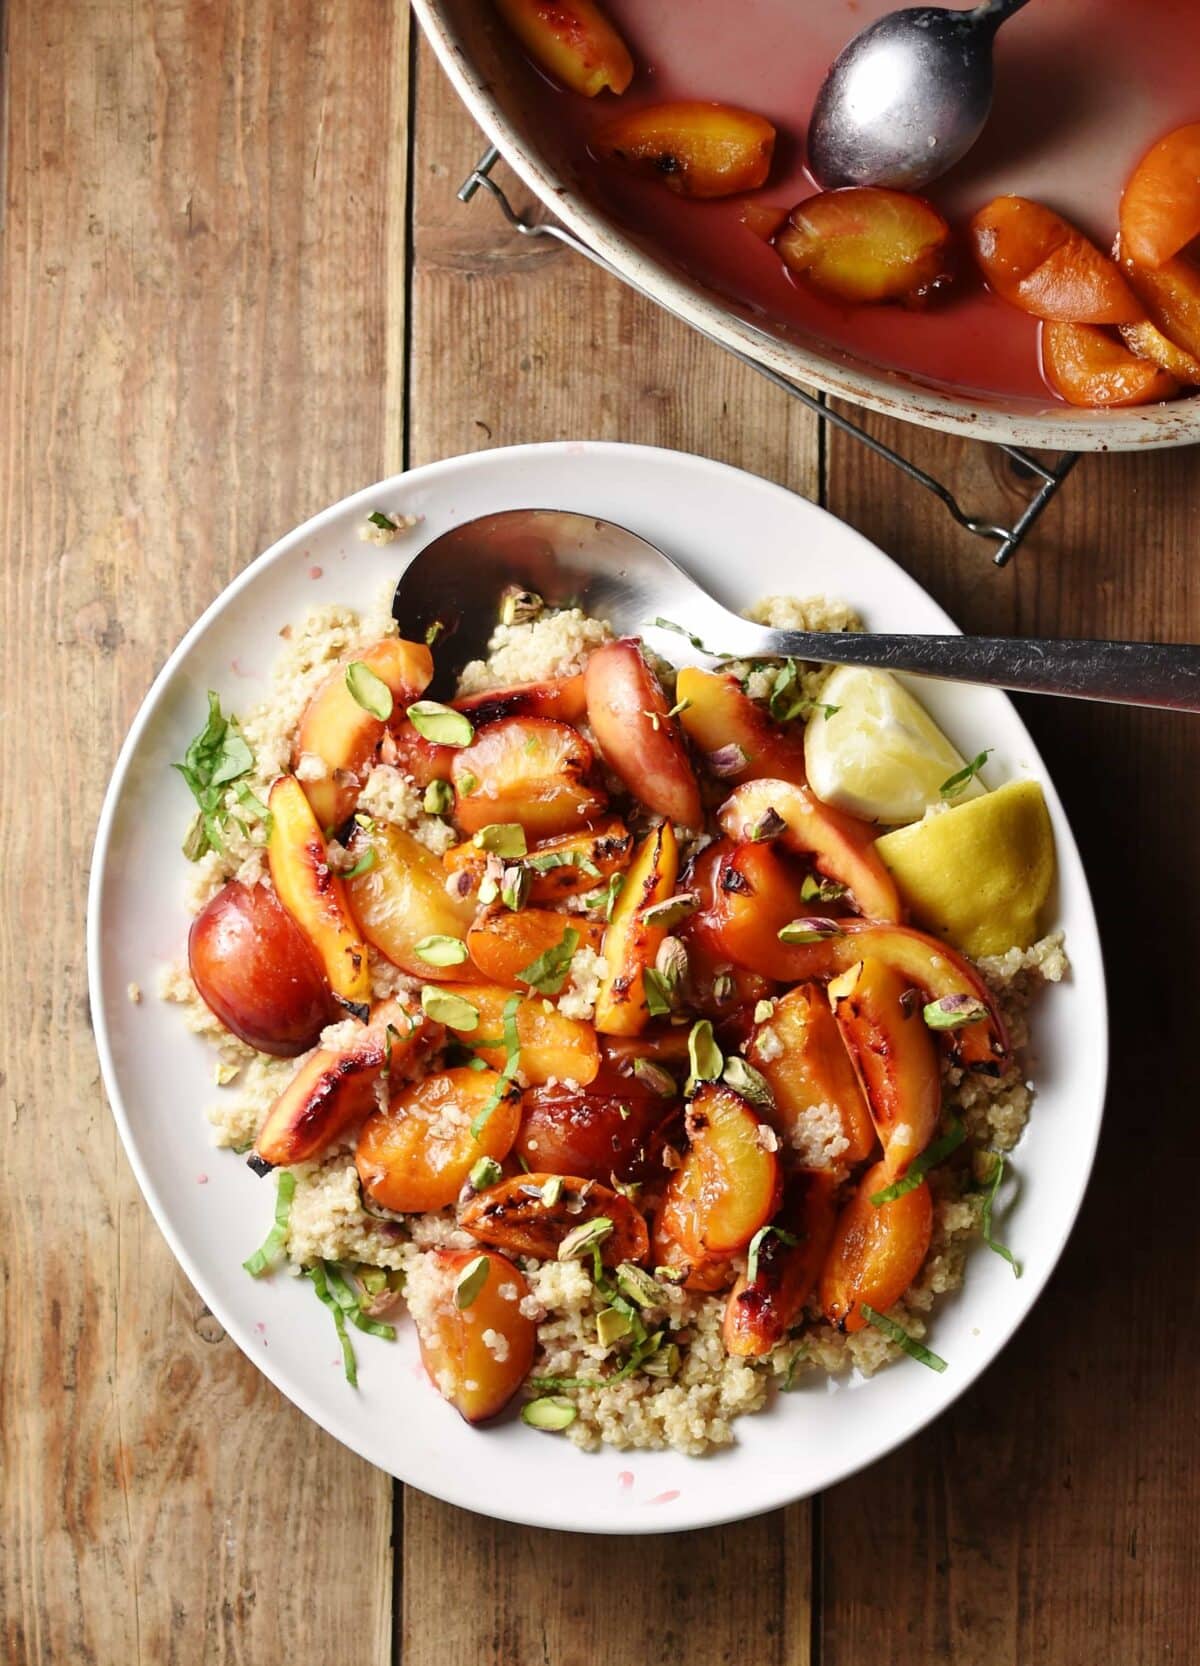 Roasted peach wedges with nuts and herbs on top of quinoa, with lemon wedges and spoon on white plate, with cooked peaches and syrup inside oven dish in top right corner.